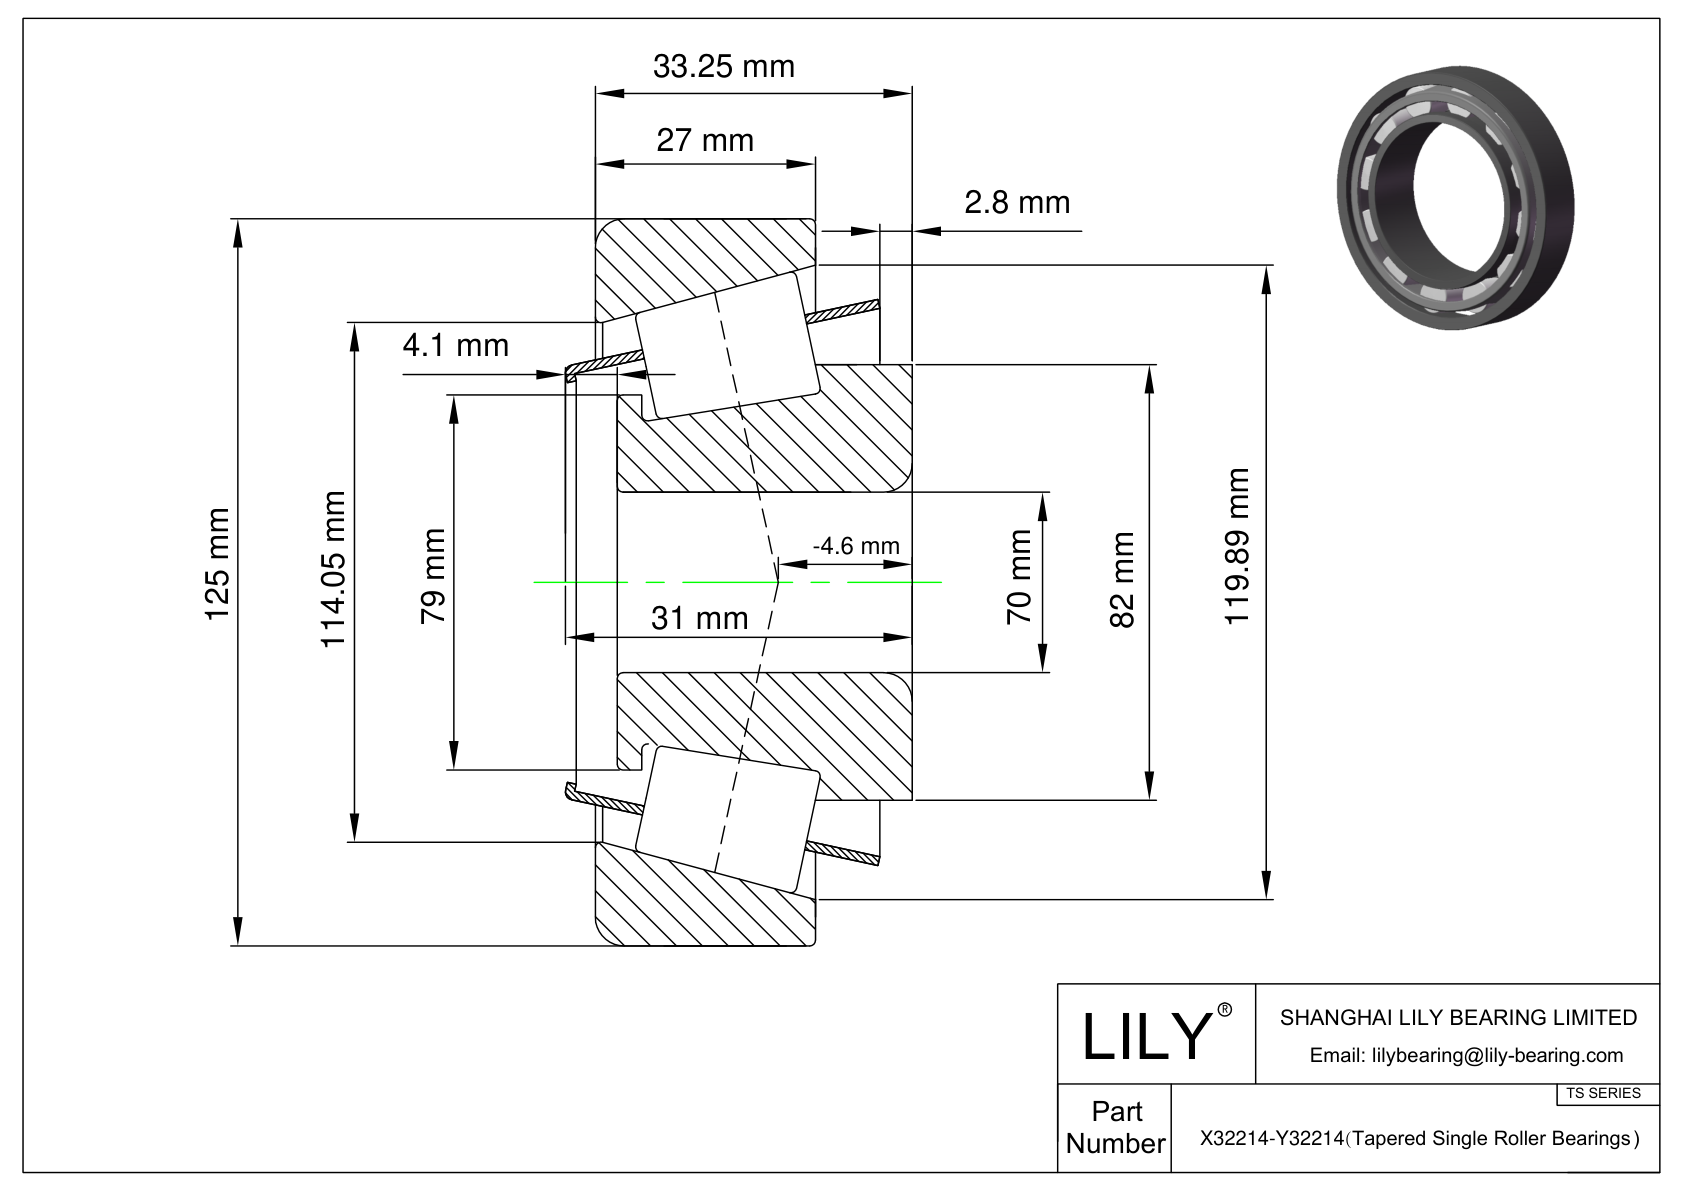 X32214-Y32214 TS (Tapered Single Roller Bearings) (Metric) cad drawing